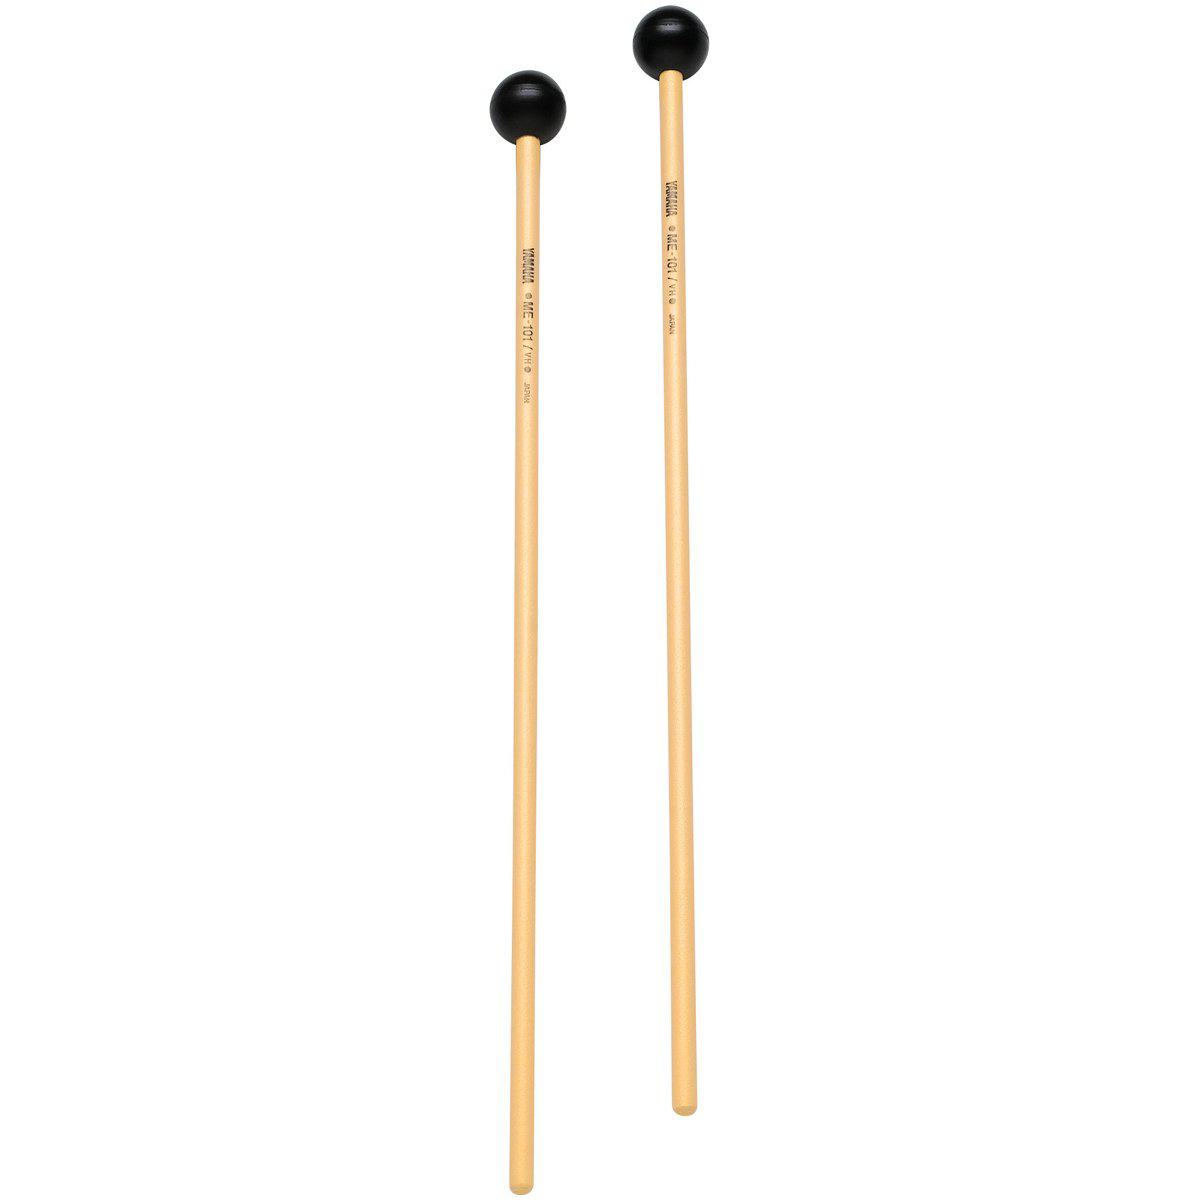 Yamaha Educational Series Very Hard Rubber Mallets ME101-Andy's Music